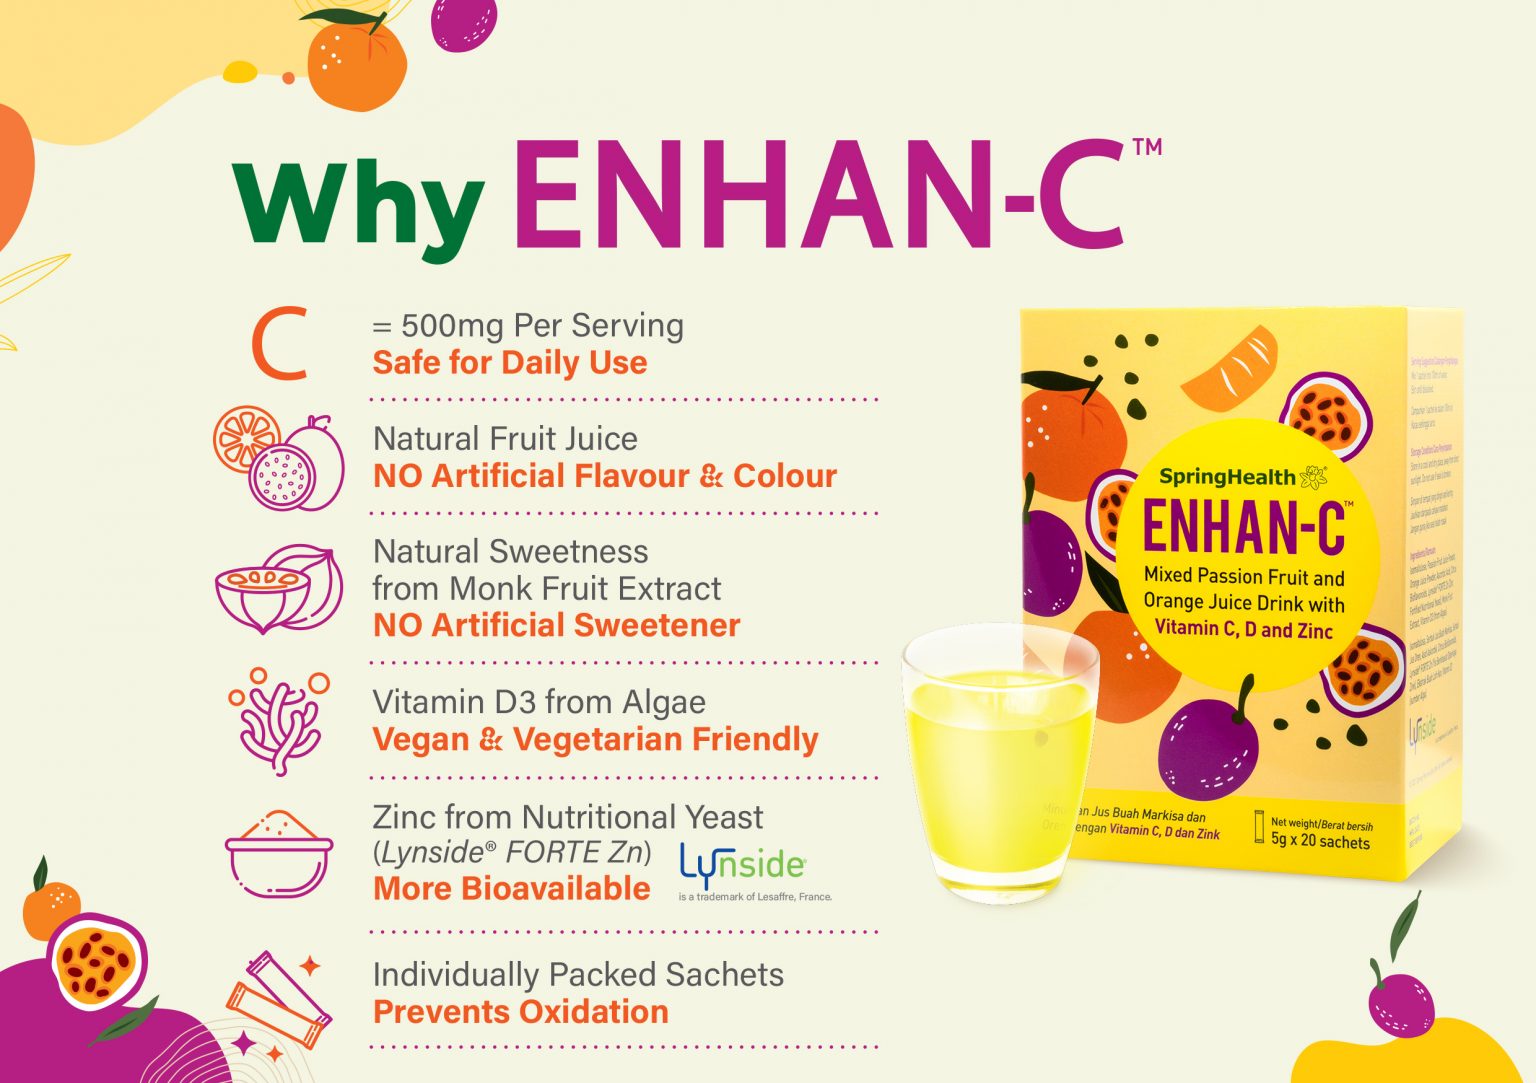 SpringHealth ENHAN-C™ Mixed Passion Fruit and Orange Juice Drink with Vitamin C, D and Zinc - 20's - Wellcome Pharmacy